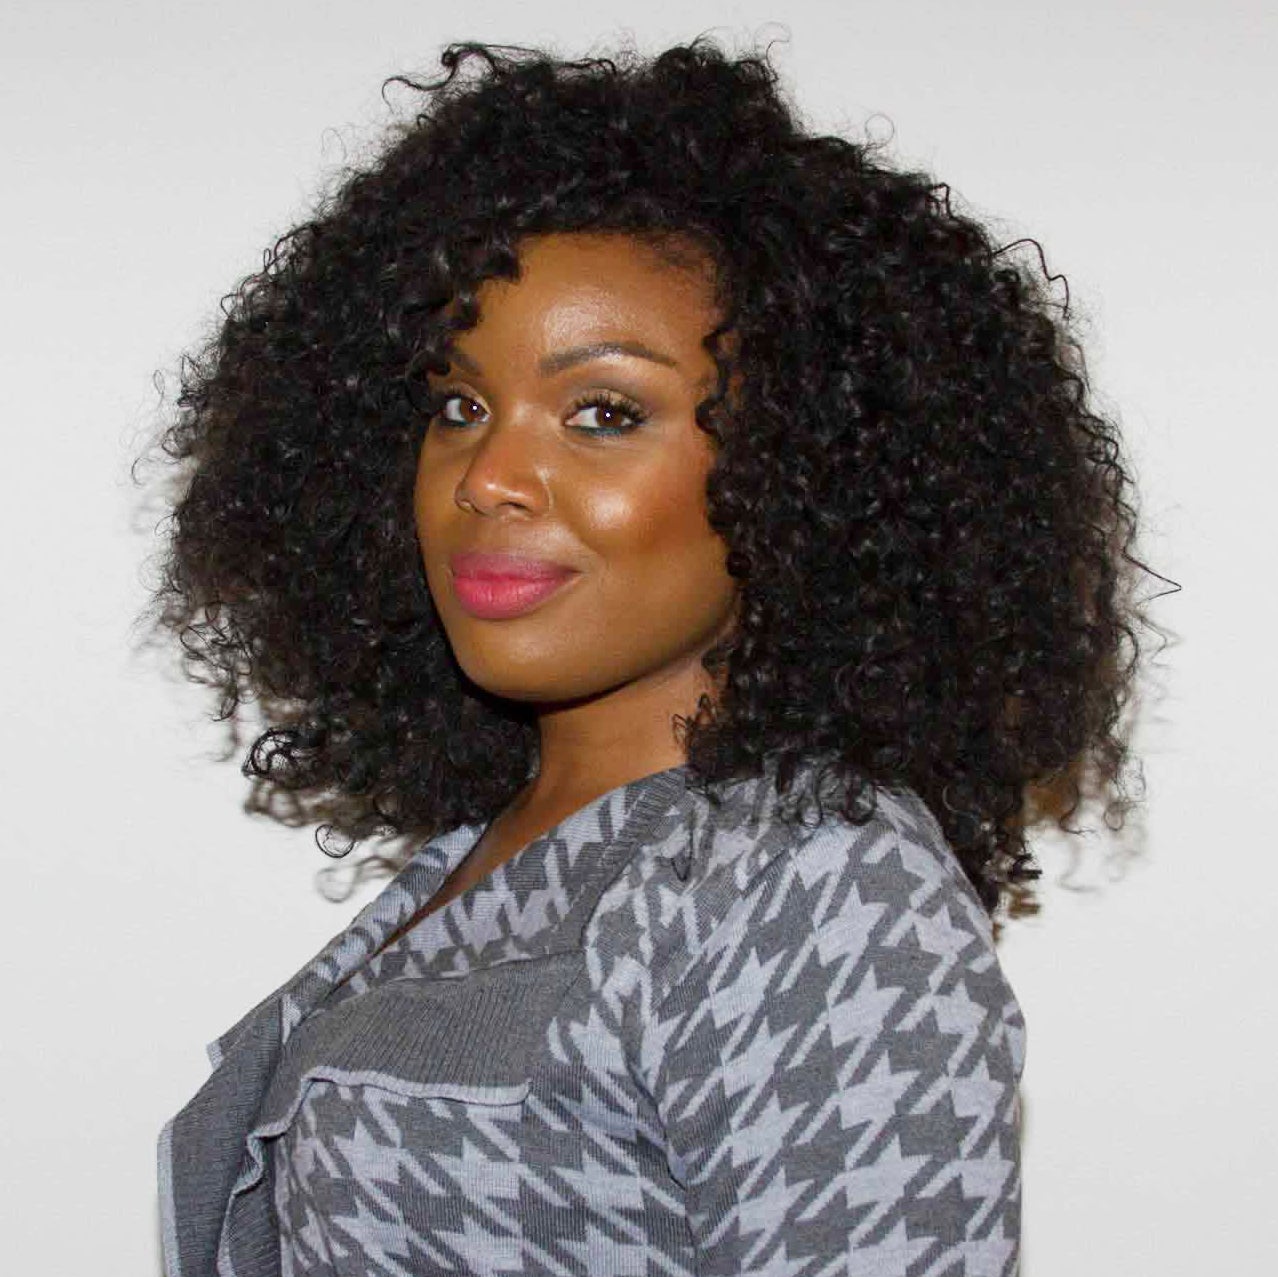 The Best Black Hairstyles at The Makeup Show NYC
